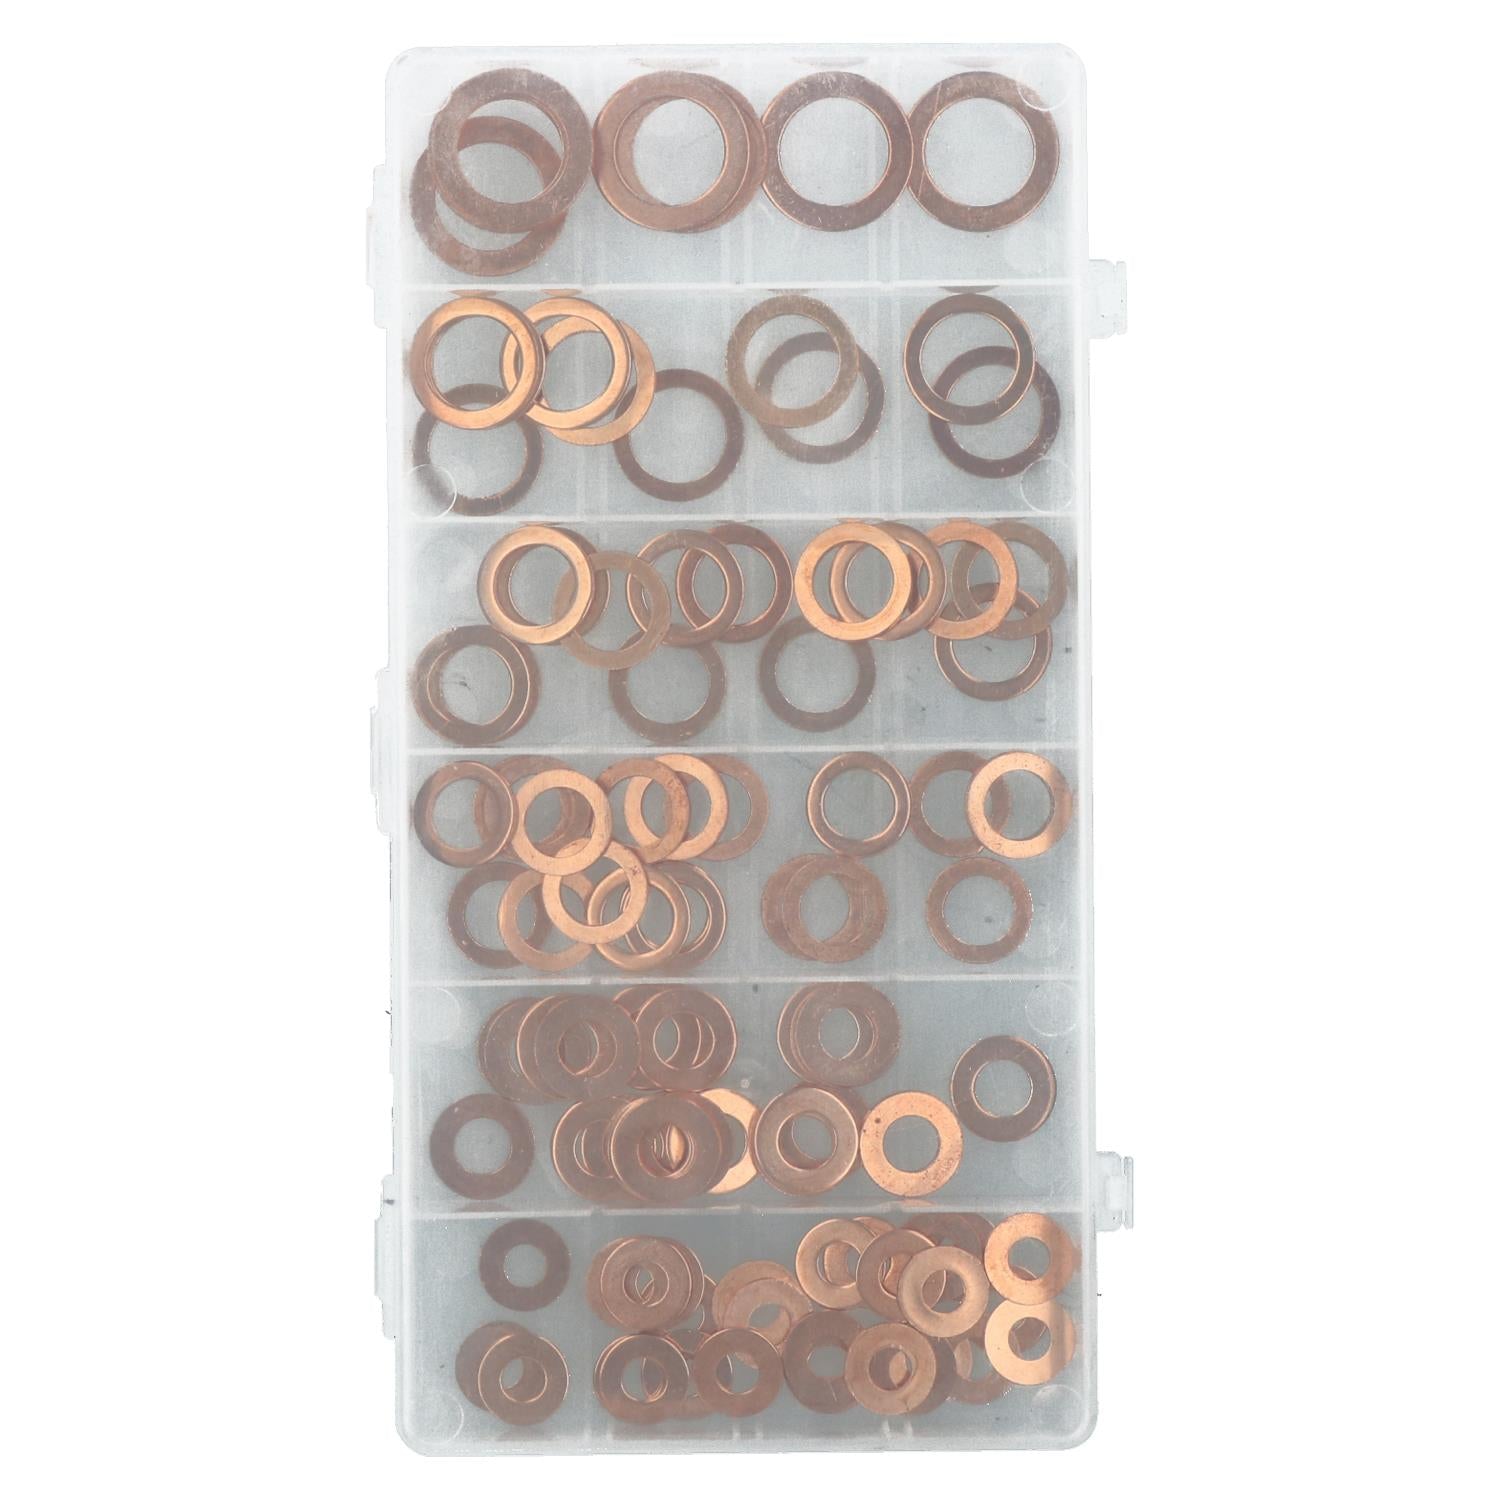 110PC Copper Washer Assortment M6 - 16 Hydraulic Fitting Seal Sump Ring Plug